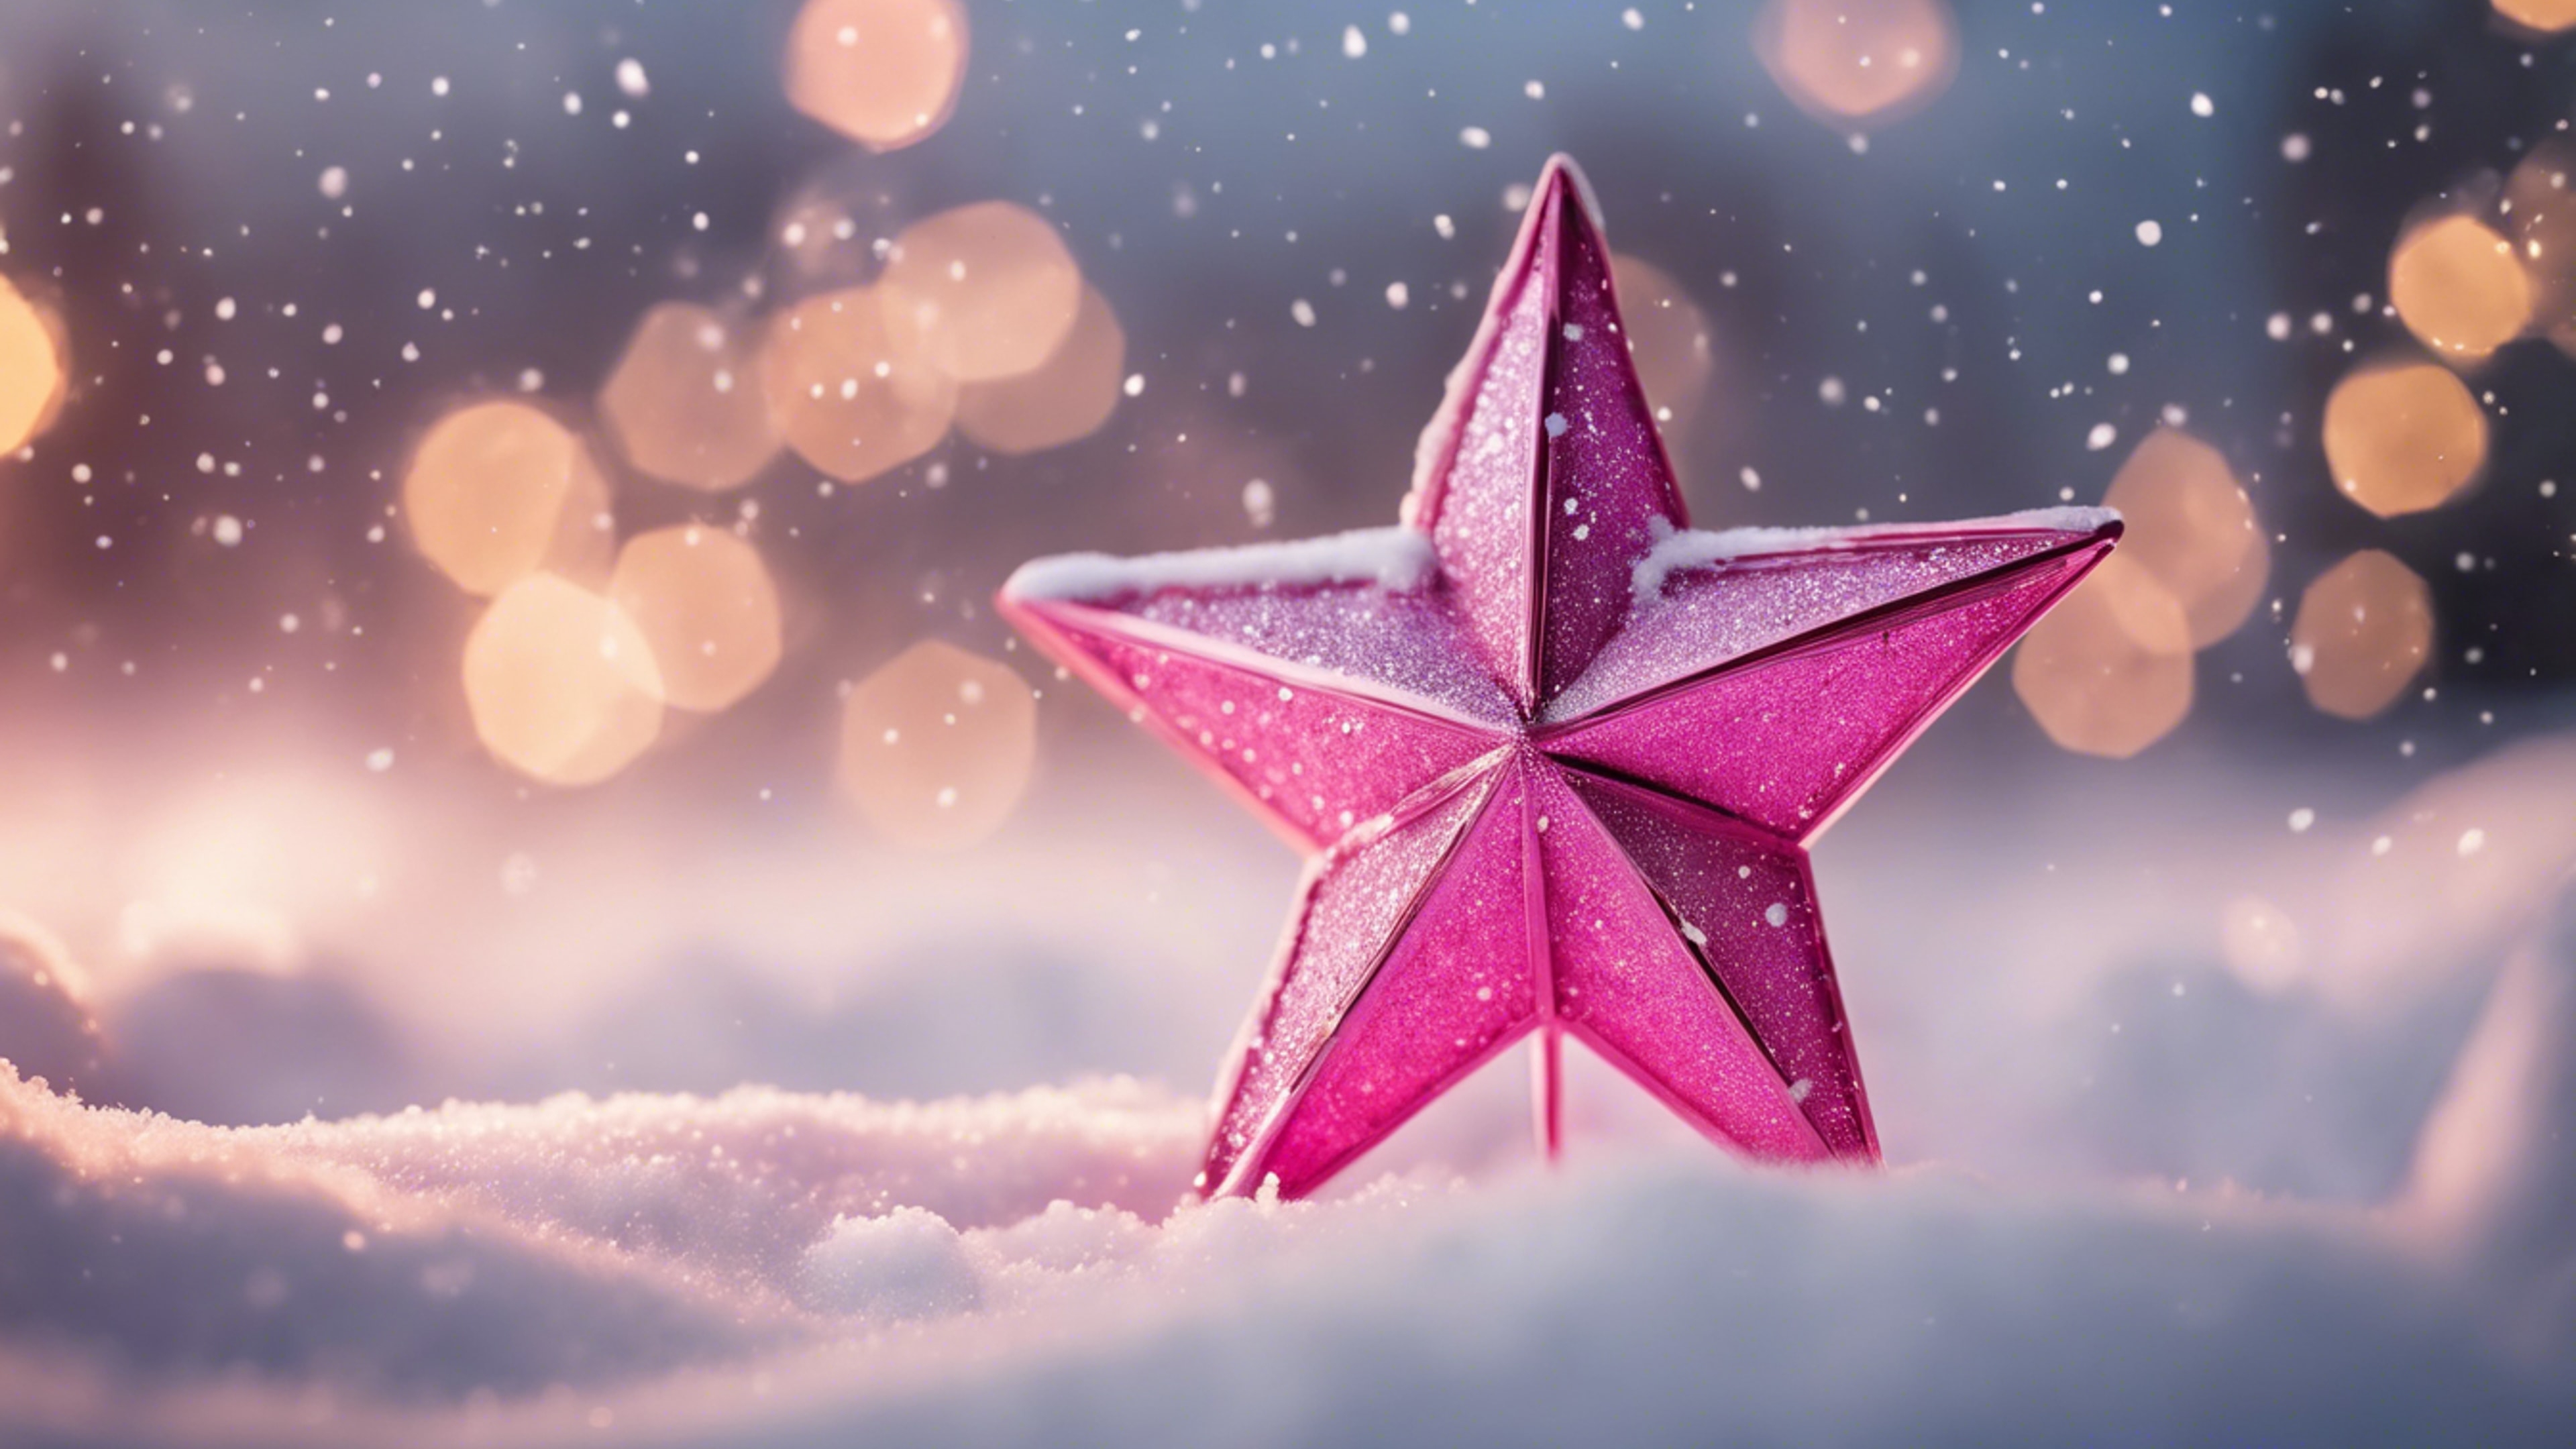 A brightly lit pink Christmas star against the backdrop of a snow-filled sky. Шпалери[528d0c7ac72f41809e7e]